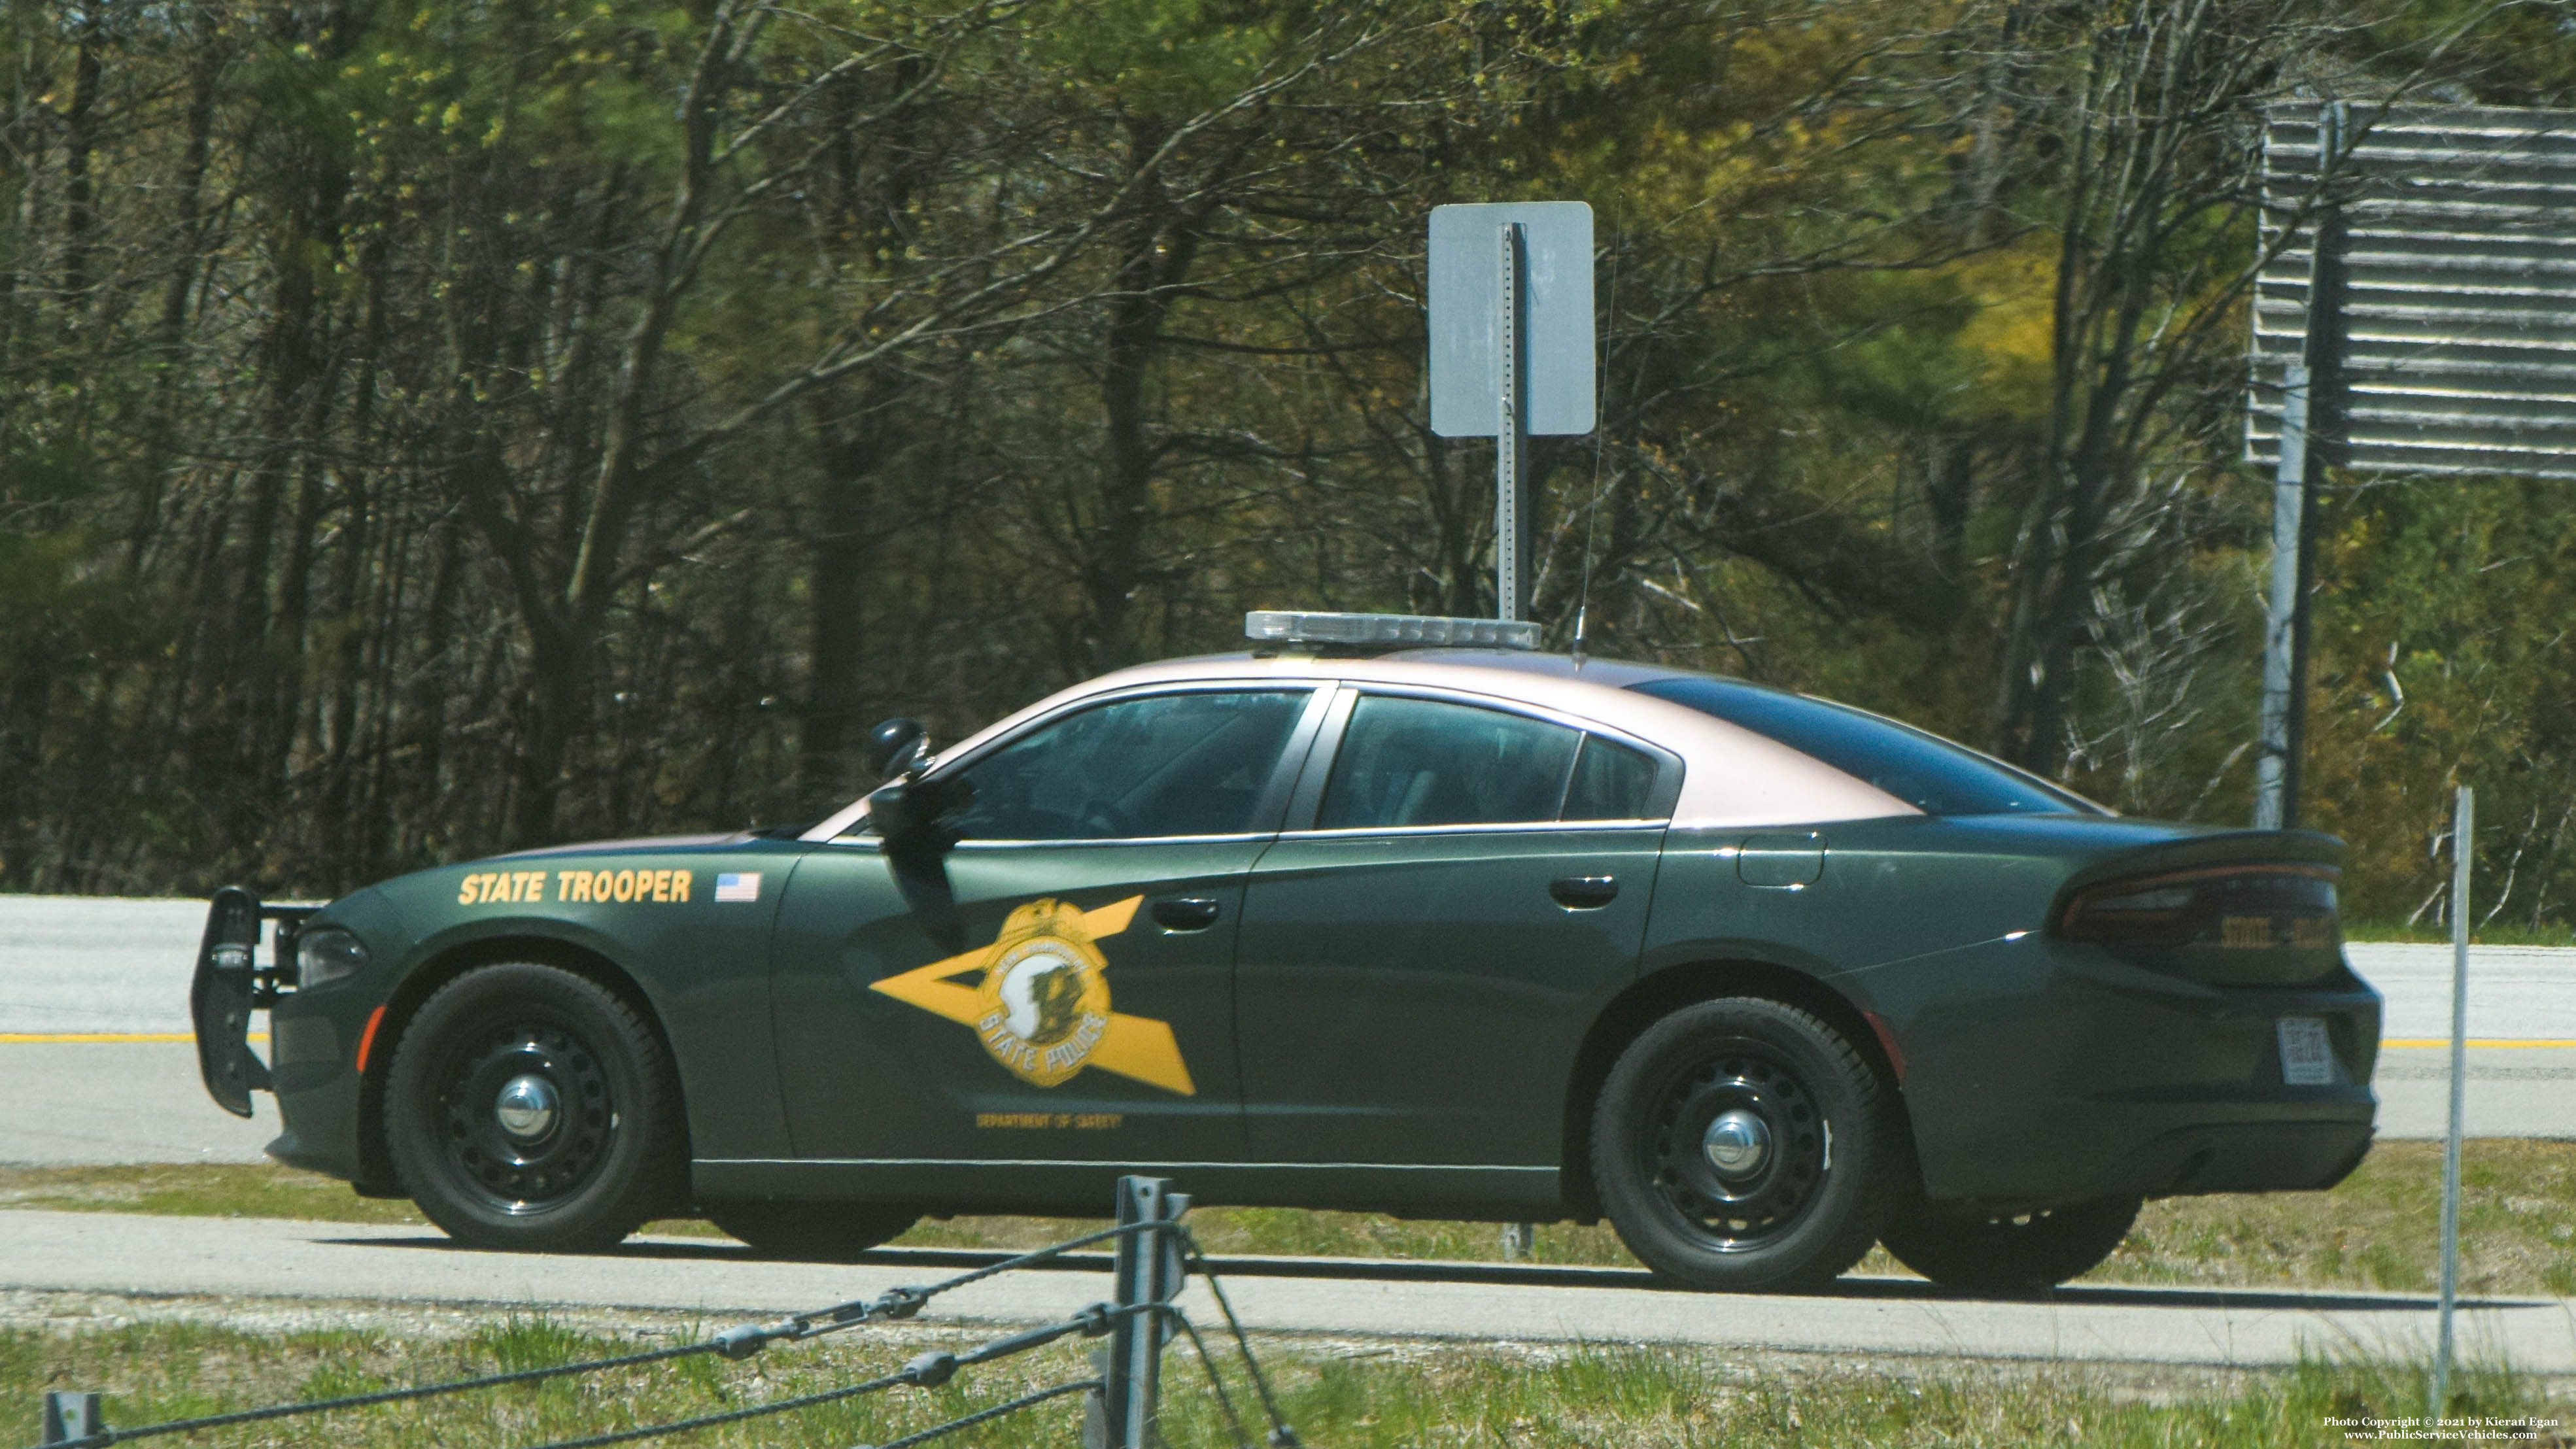 A photo  of New Hampshire State Police
            Cruiser 202, a 2015-2016 Dodge Charger             taken by Kieran Egan